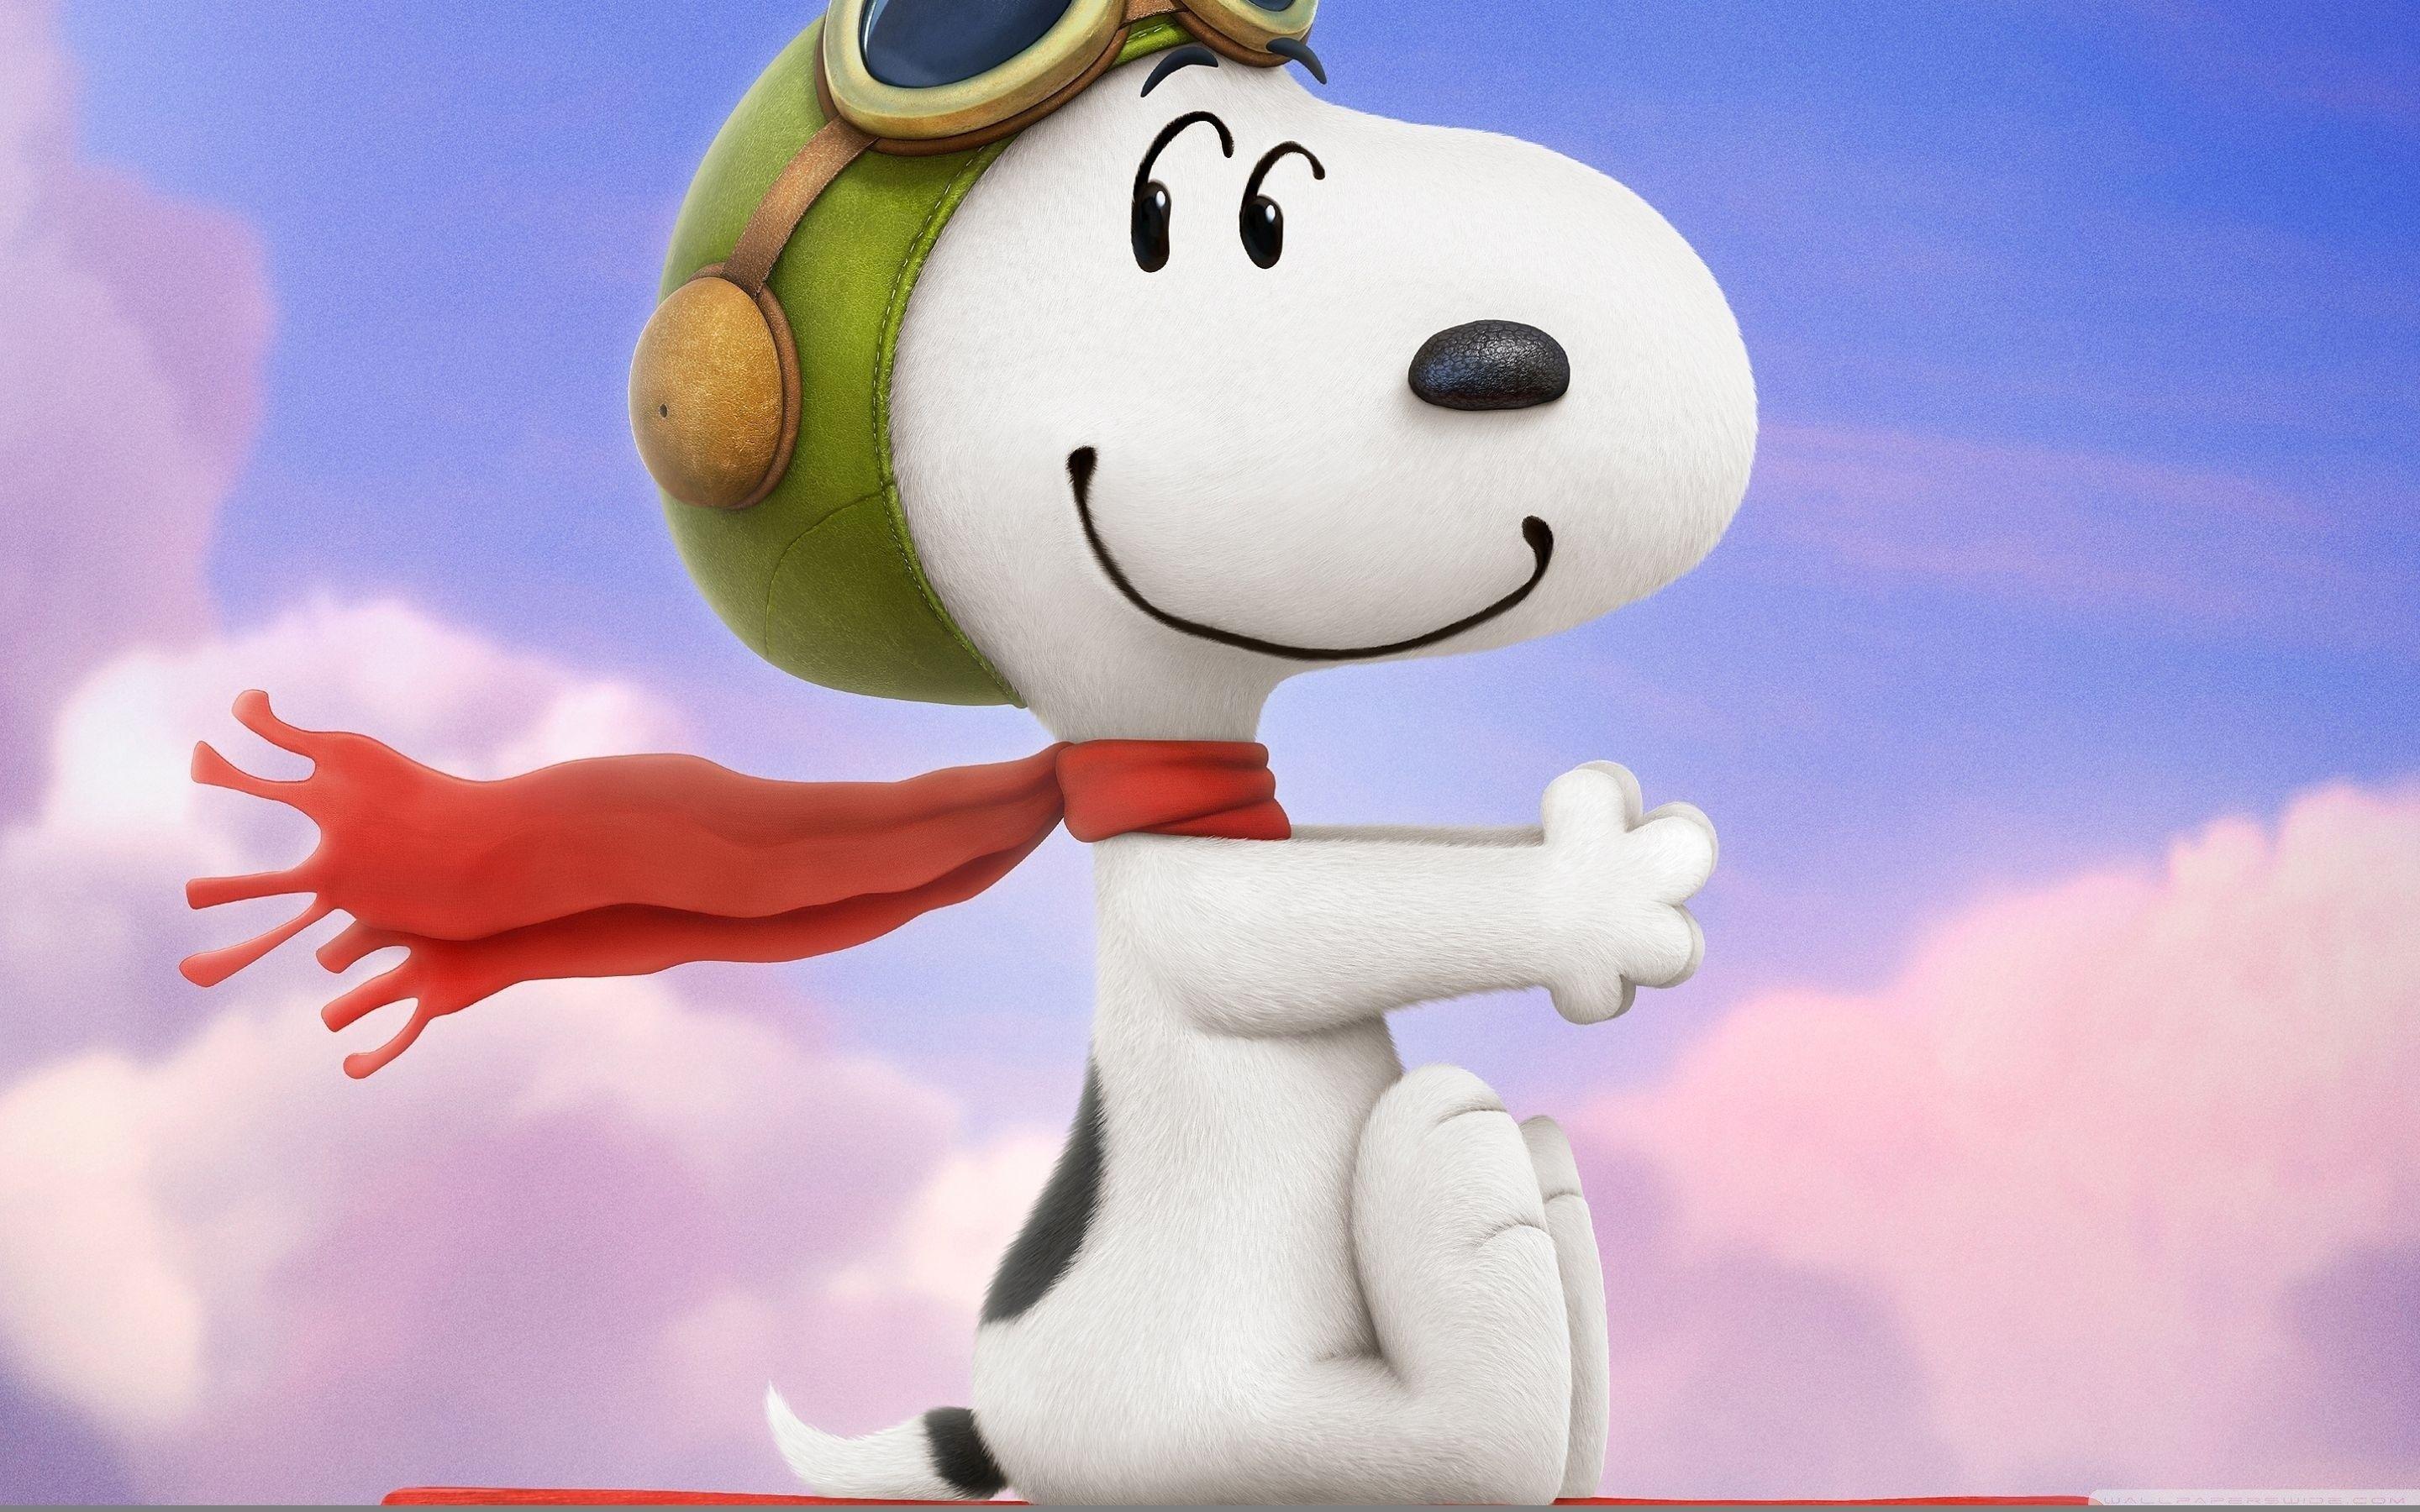 The Peanuts Snoopy Wallpaper